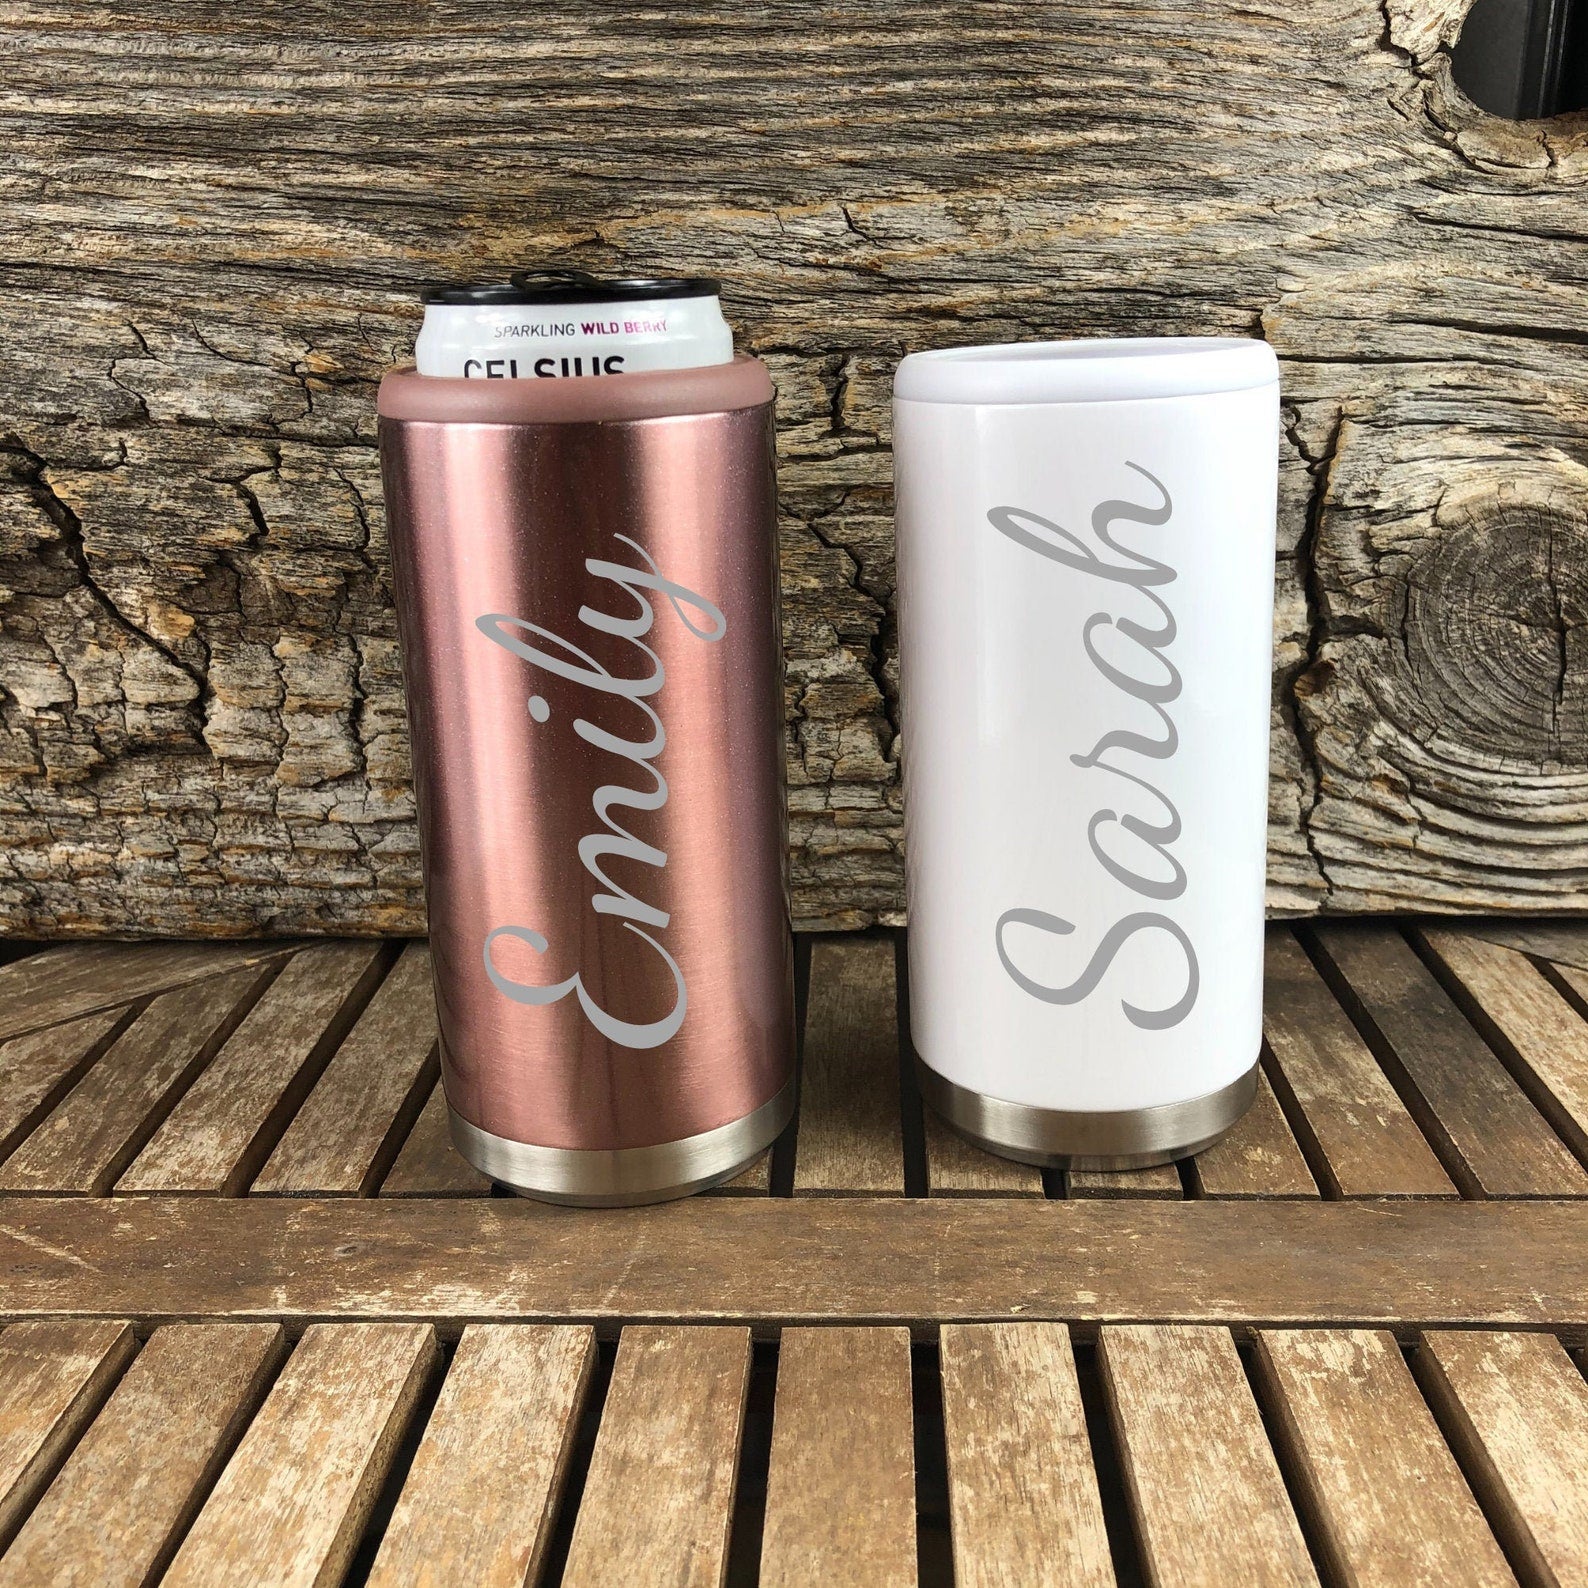 All She Ever Does is Cruise Custom Engraved Can Cooler – Sunny Box